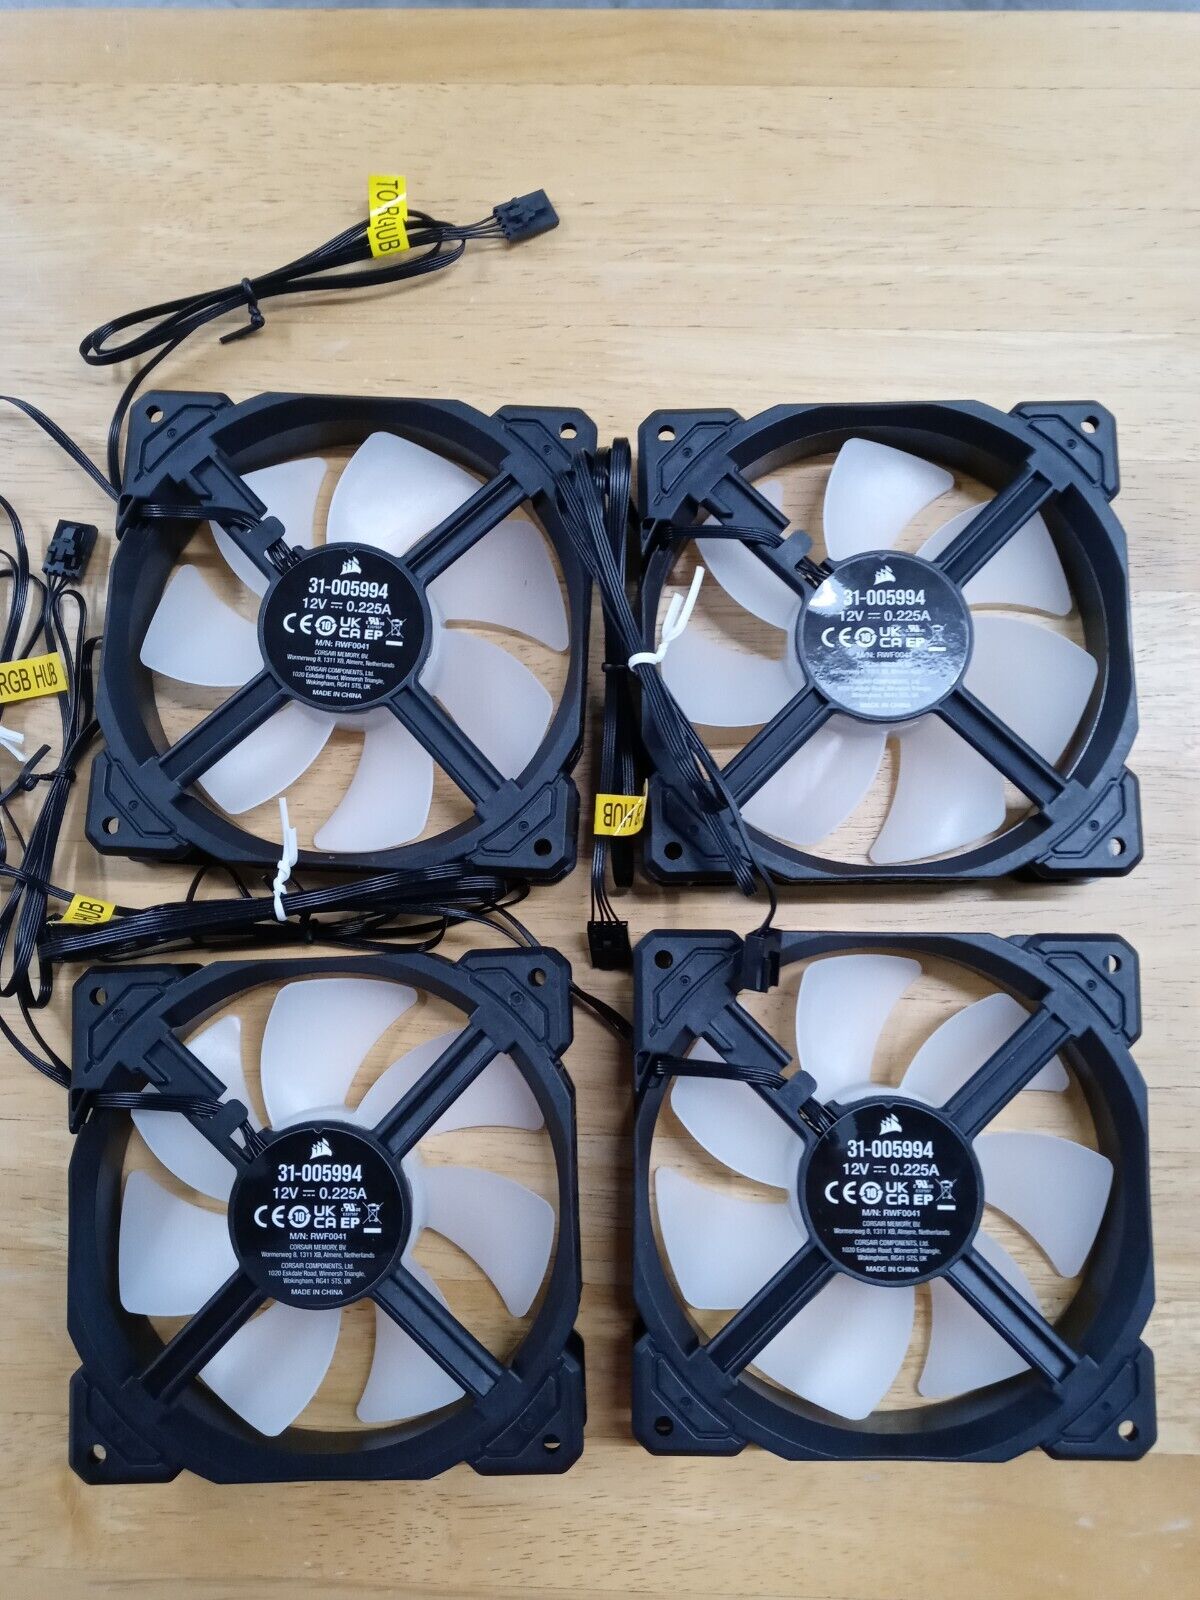 4 rgb fans new Corsair 120mm Case Fan 12V DC31005994 ,4 Pin the price is for set